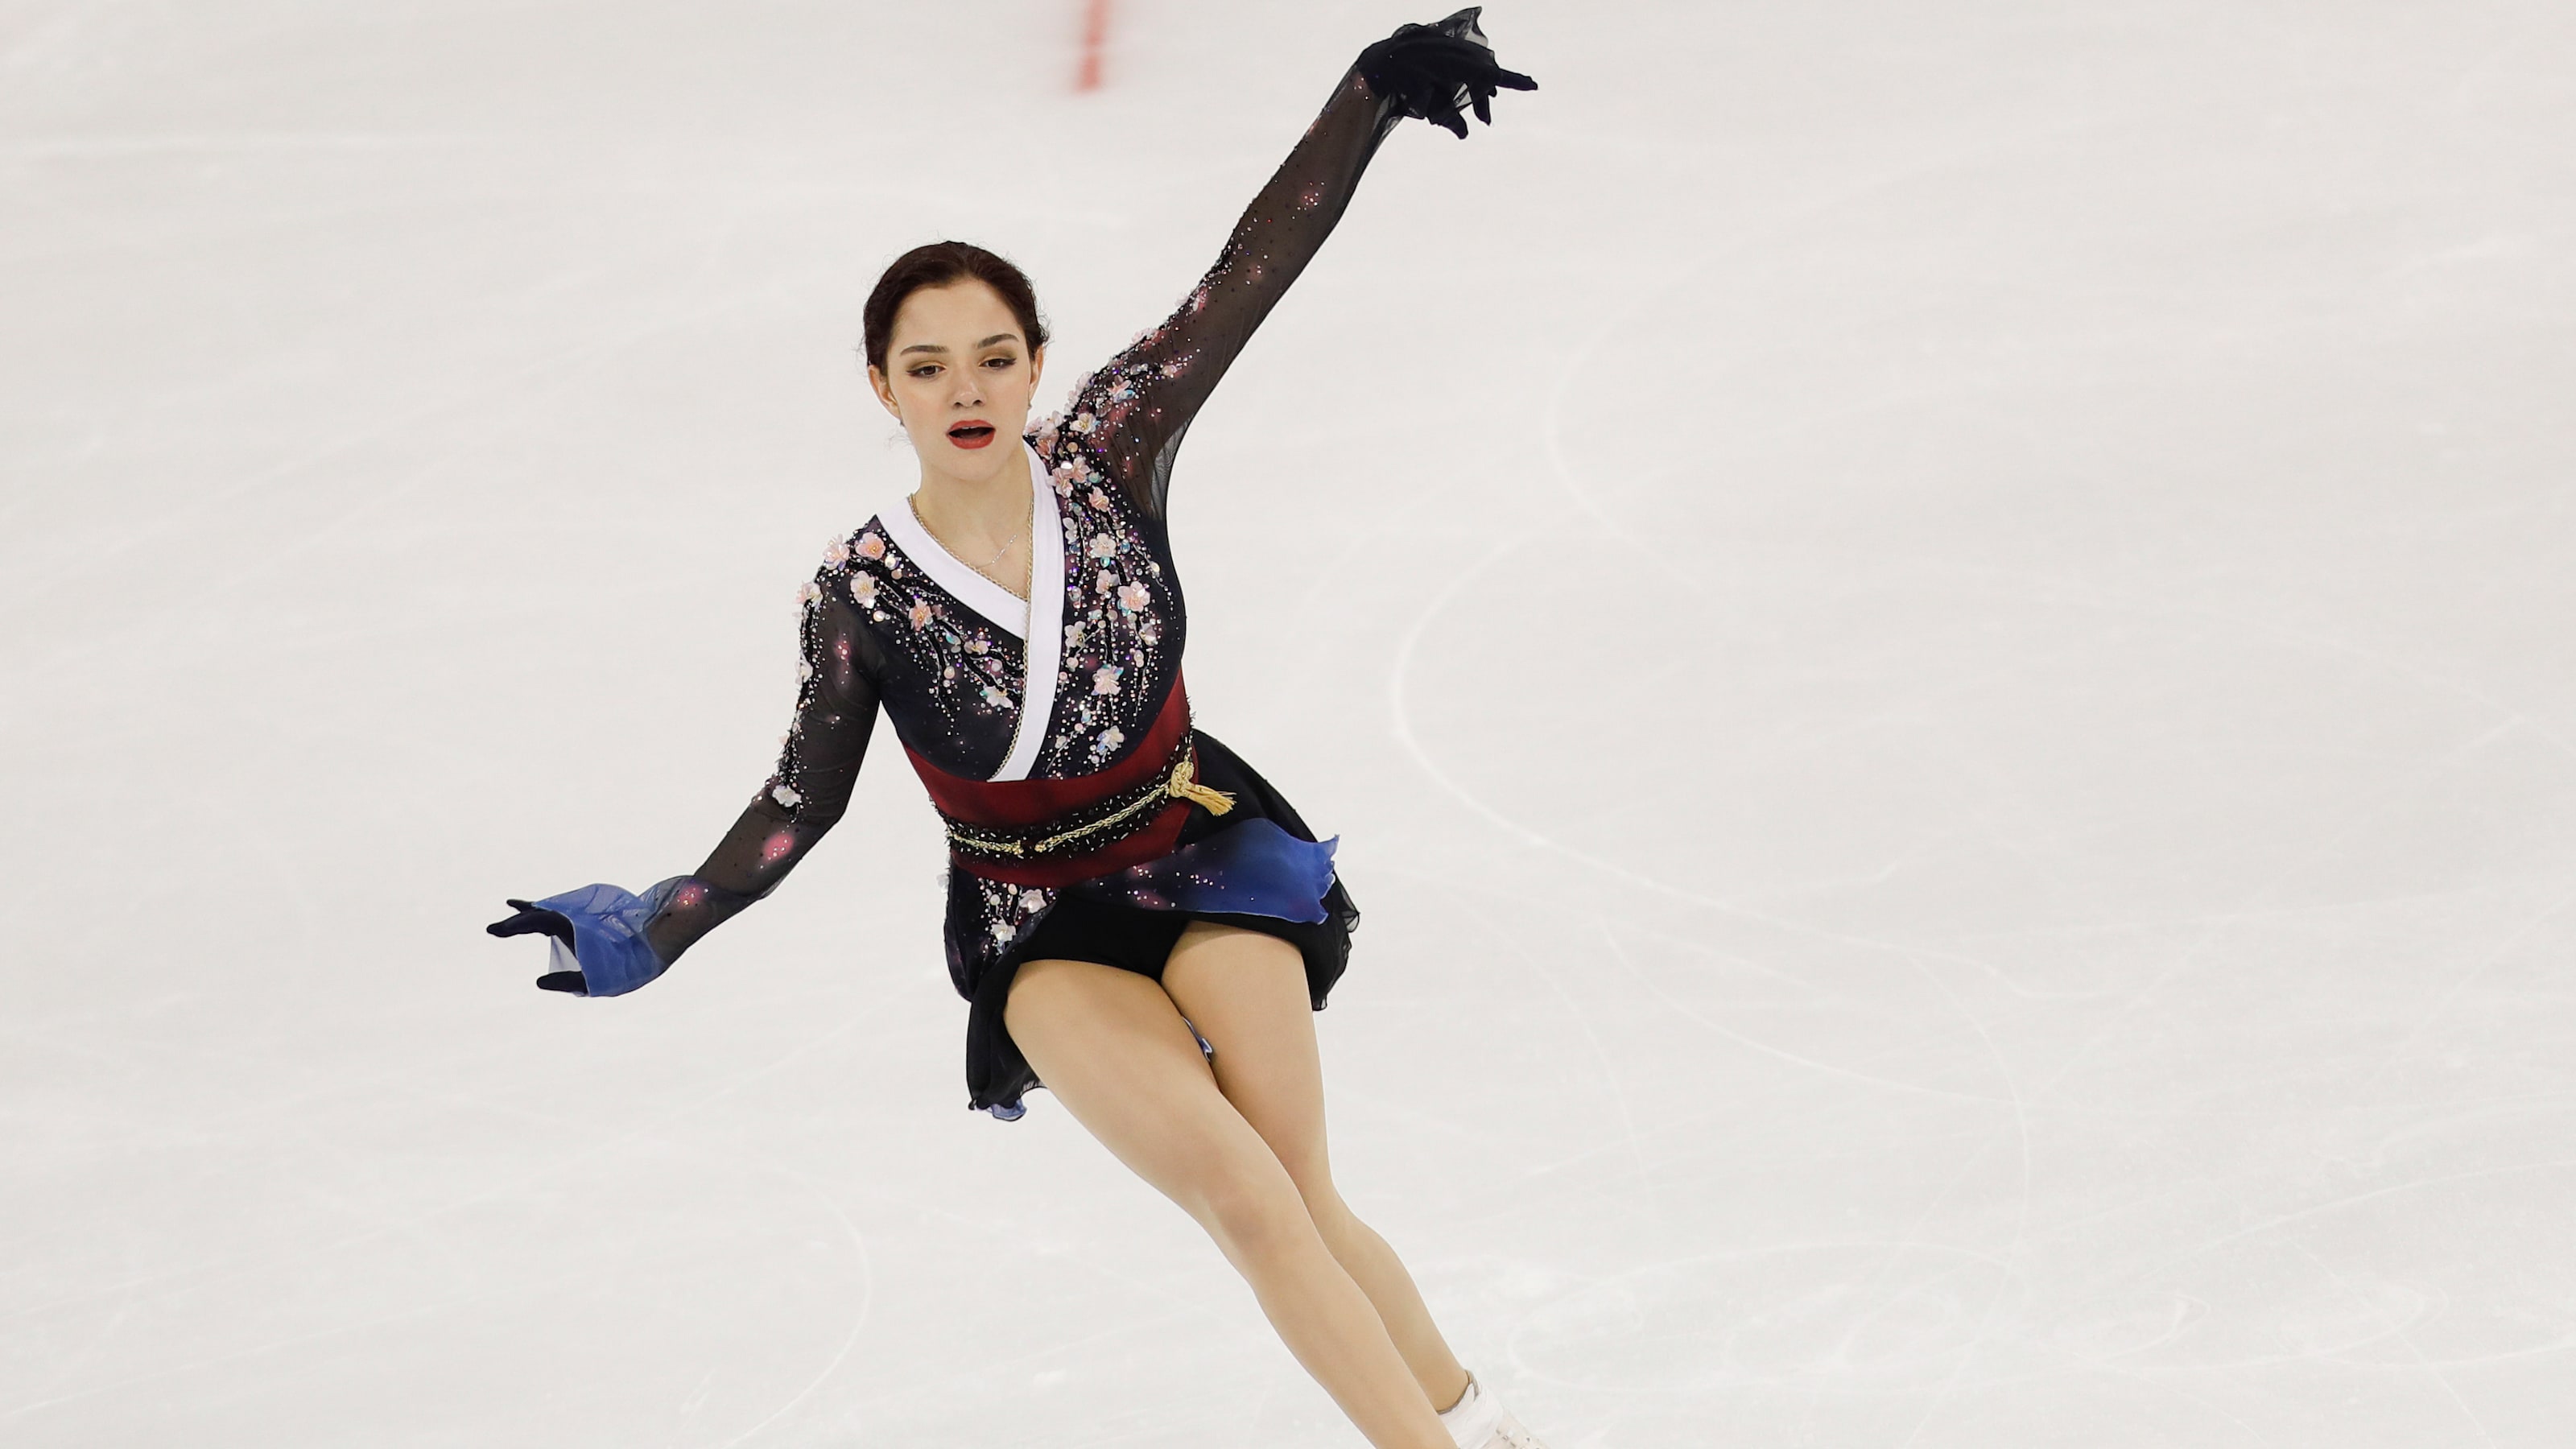 Figure skating: Grand Prix Series assignments handed out for season